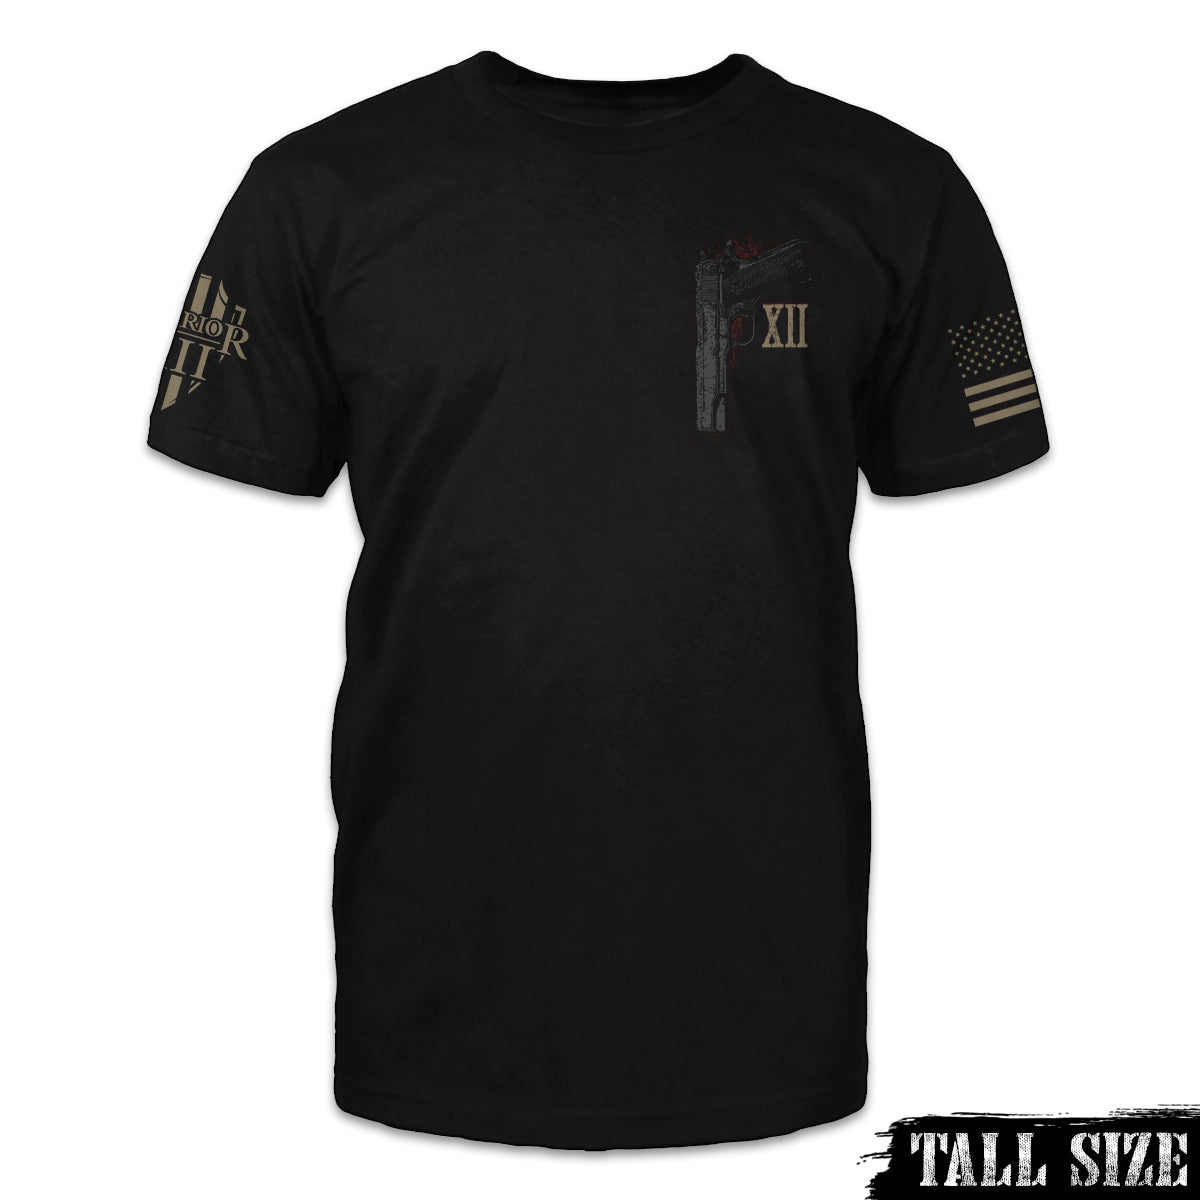 A black tall size shirt with a pistol printed on the front.